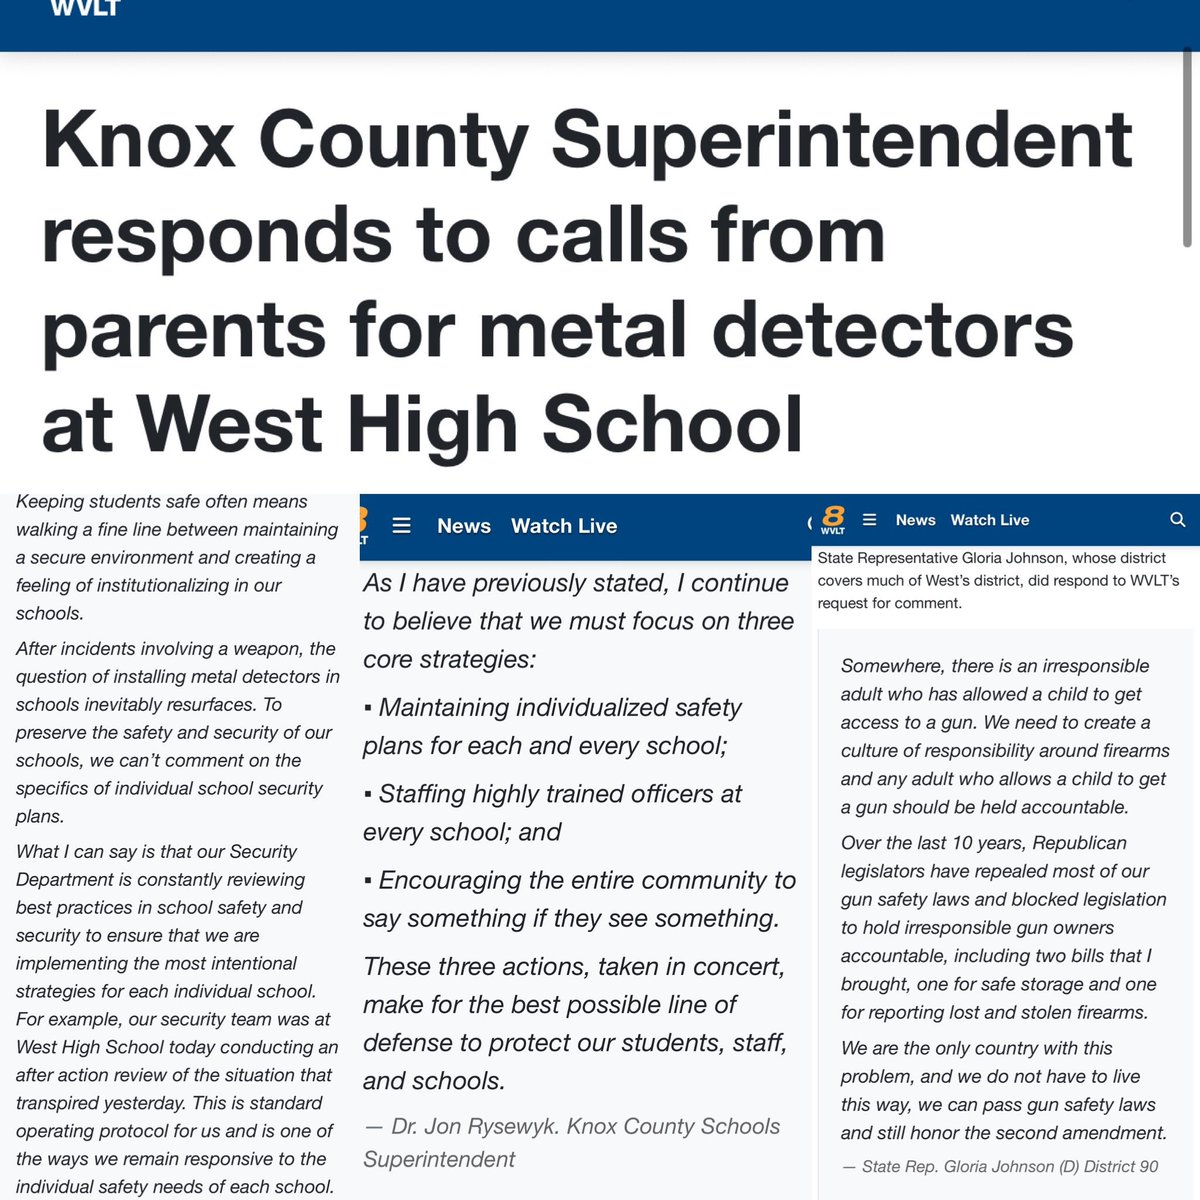 KNOXVILLE: @KCSSuper responds to calls for metal detectors after a gun was found at school, saying they are “reviewing best practices” @VoteGloriaJ says adults who let a child get a gun should be held accountable. (Republicans block her safe storage law) wvlt.tv/2024/05/15/kno…